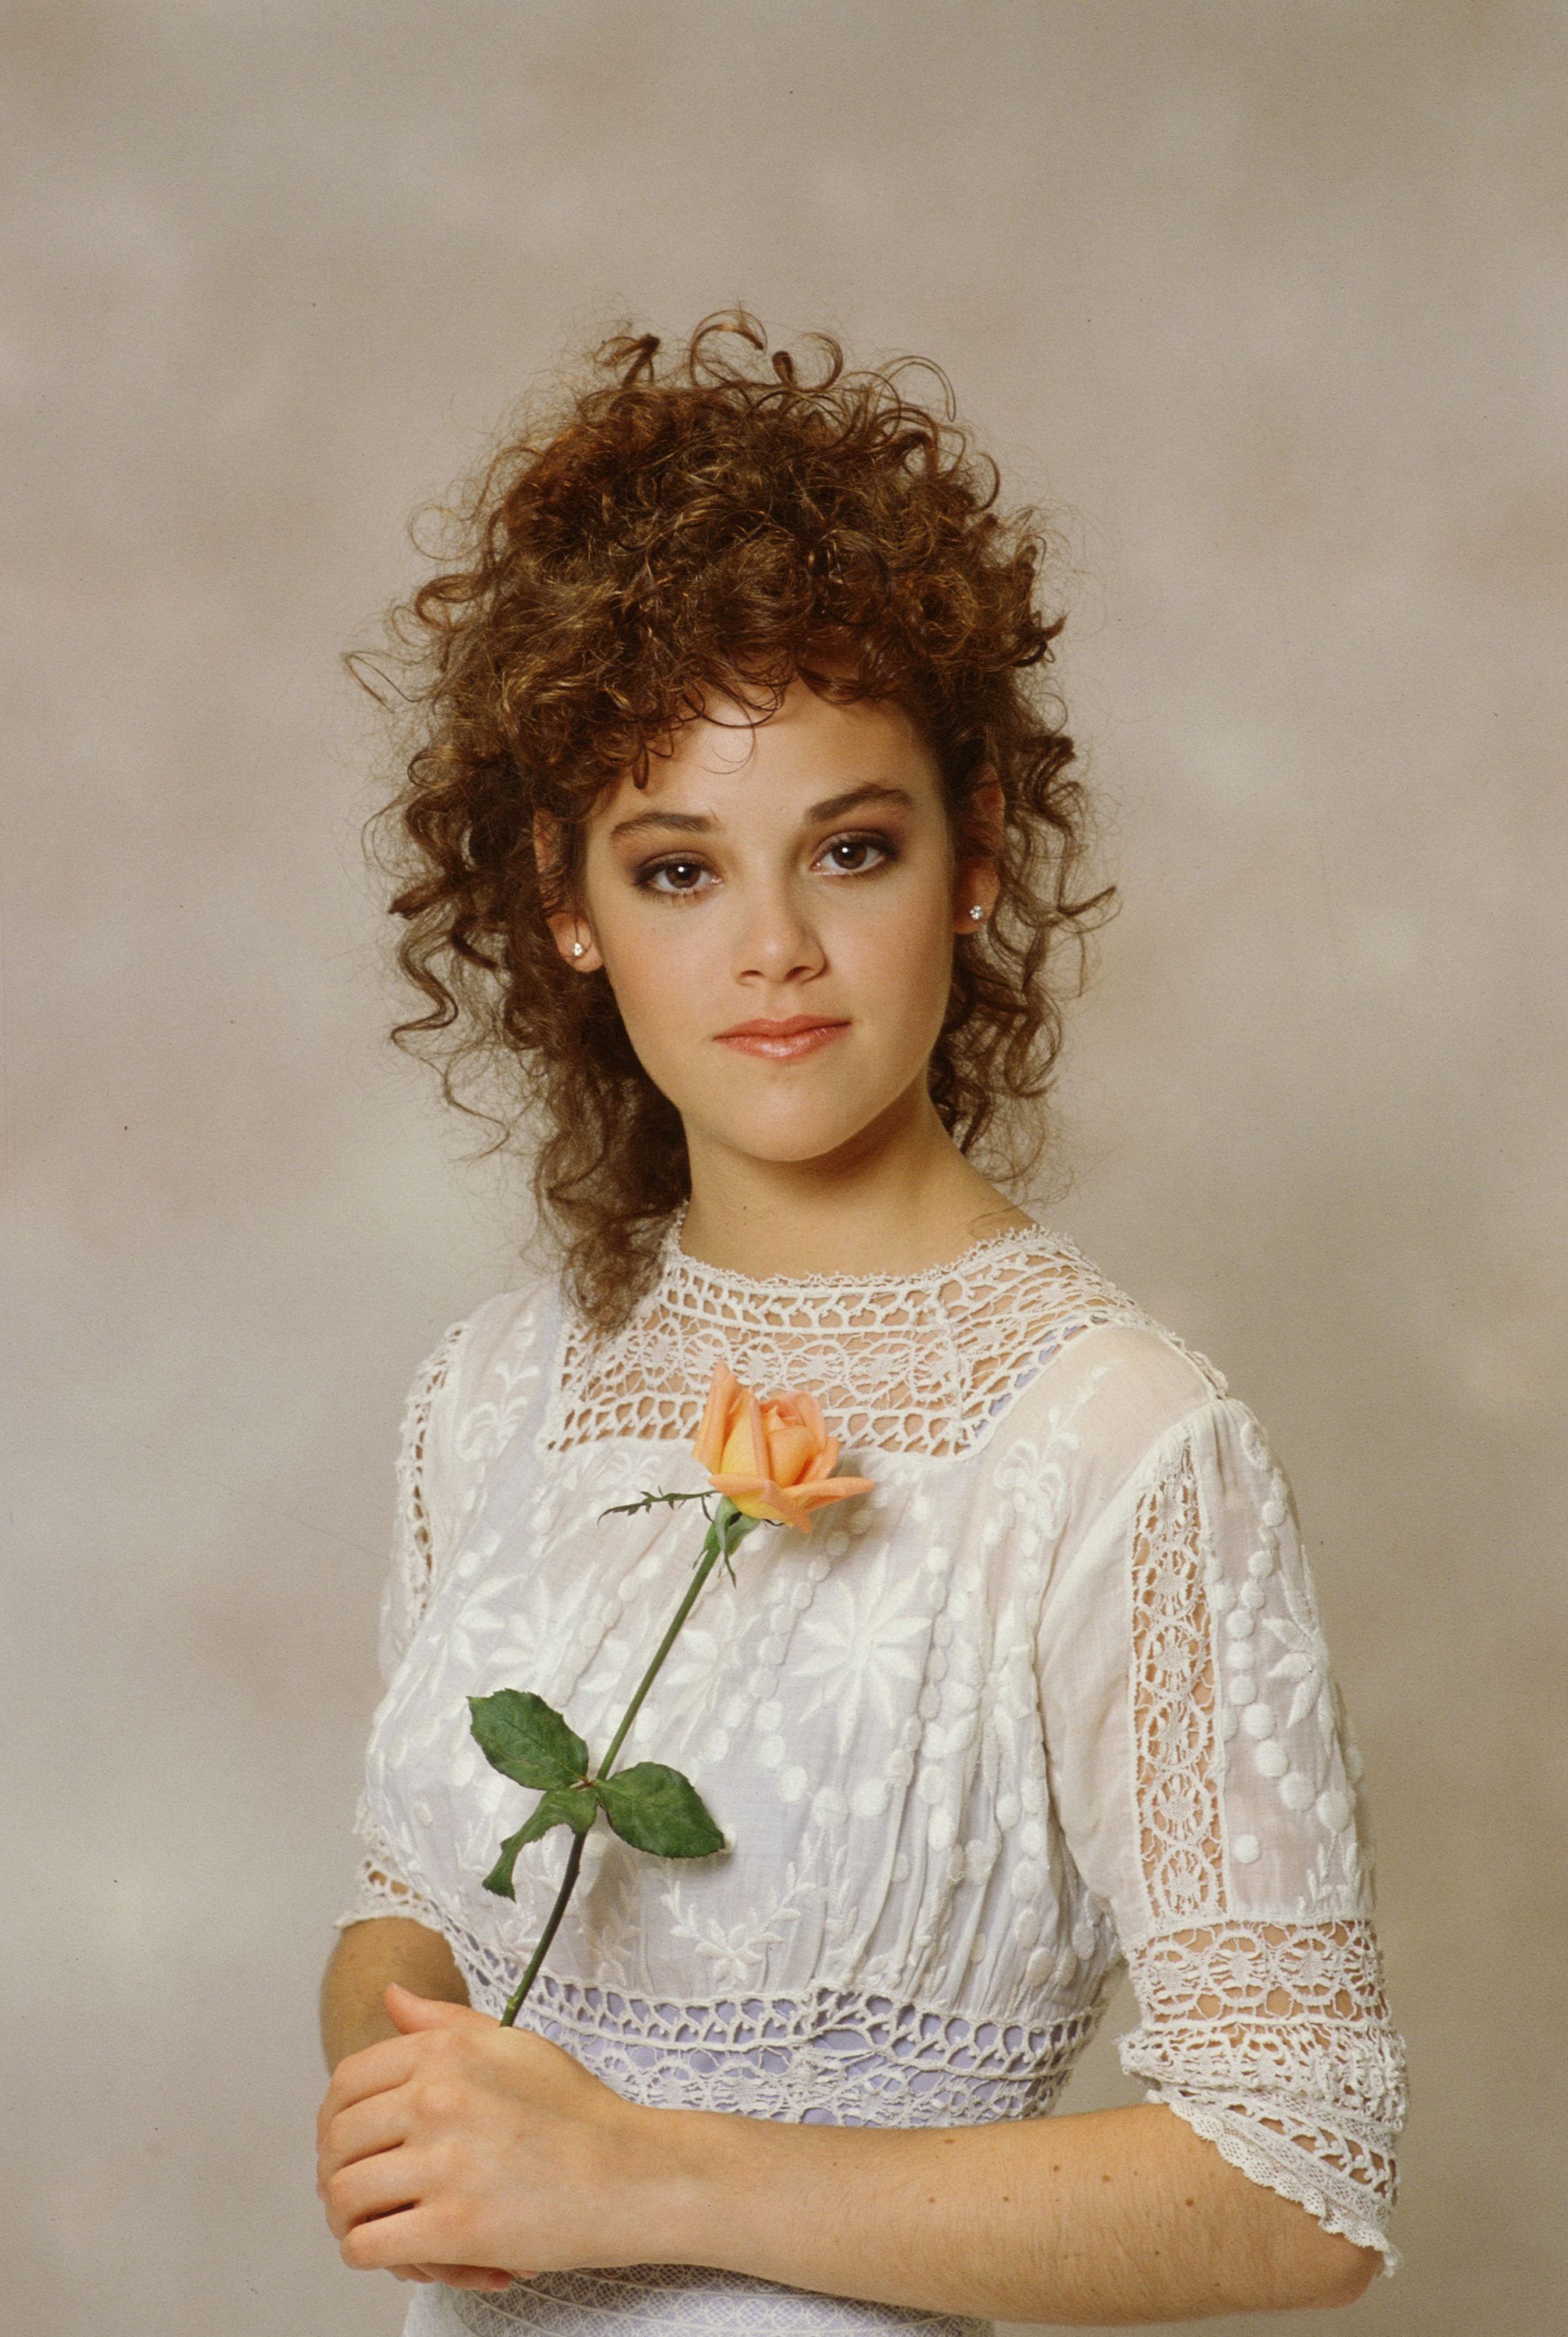 The Murder of Rebecca Schaeffer How the Actress's Tragic Death Led to